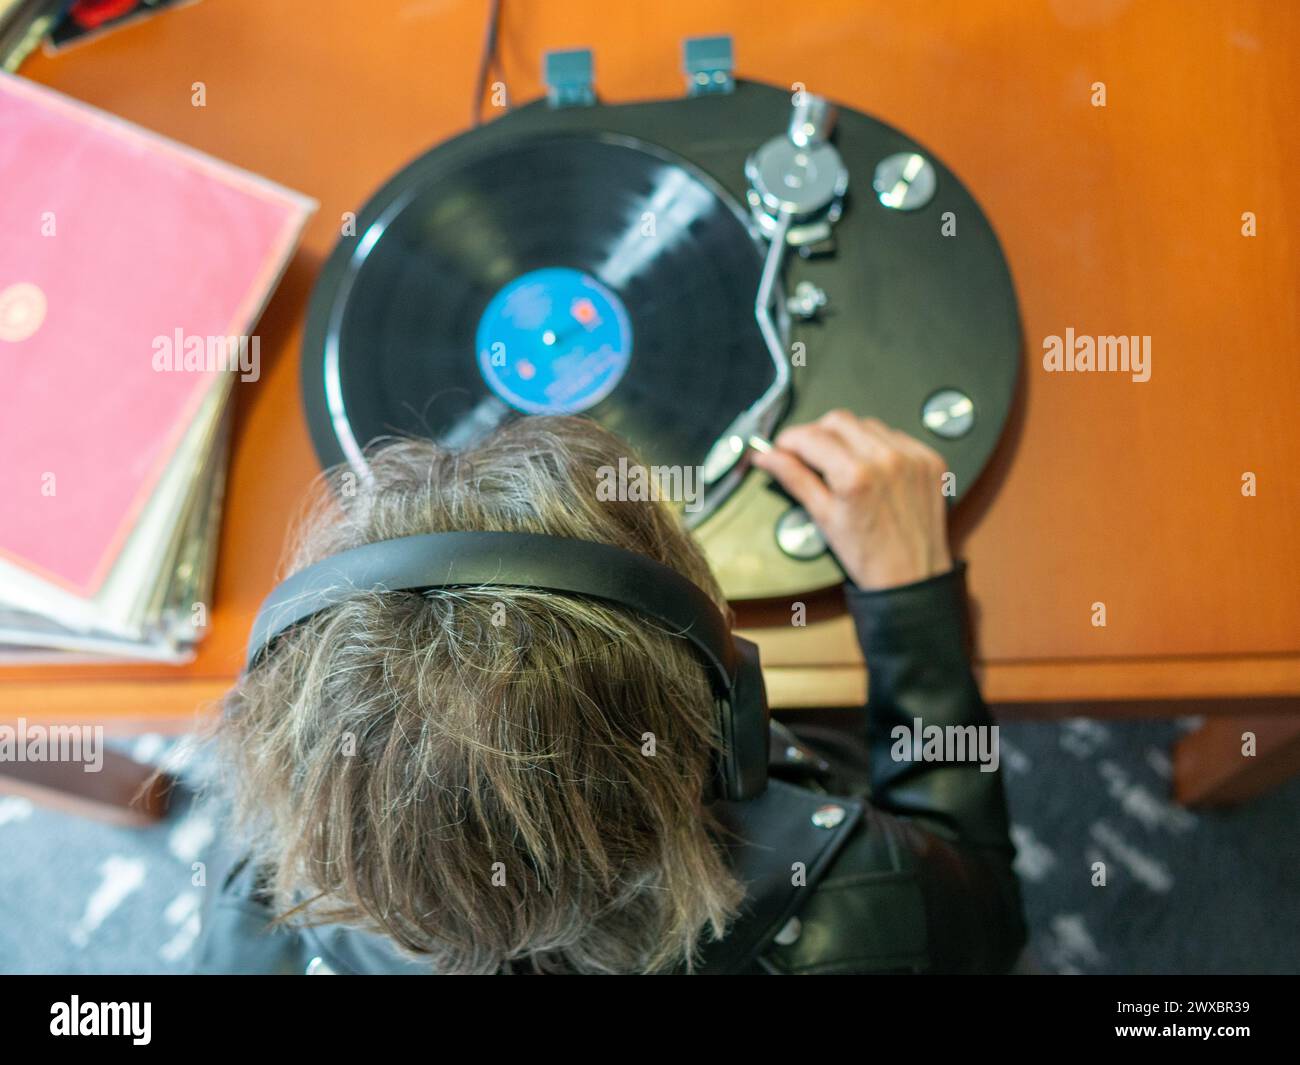 Lady hand holding the tonearm of her turntable ready to play a vinyl record Stock Photo